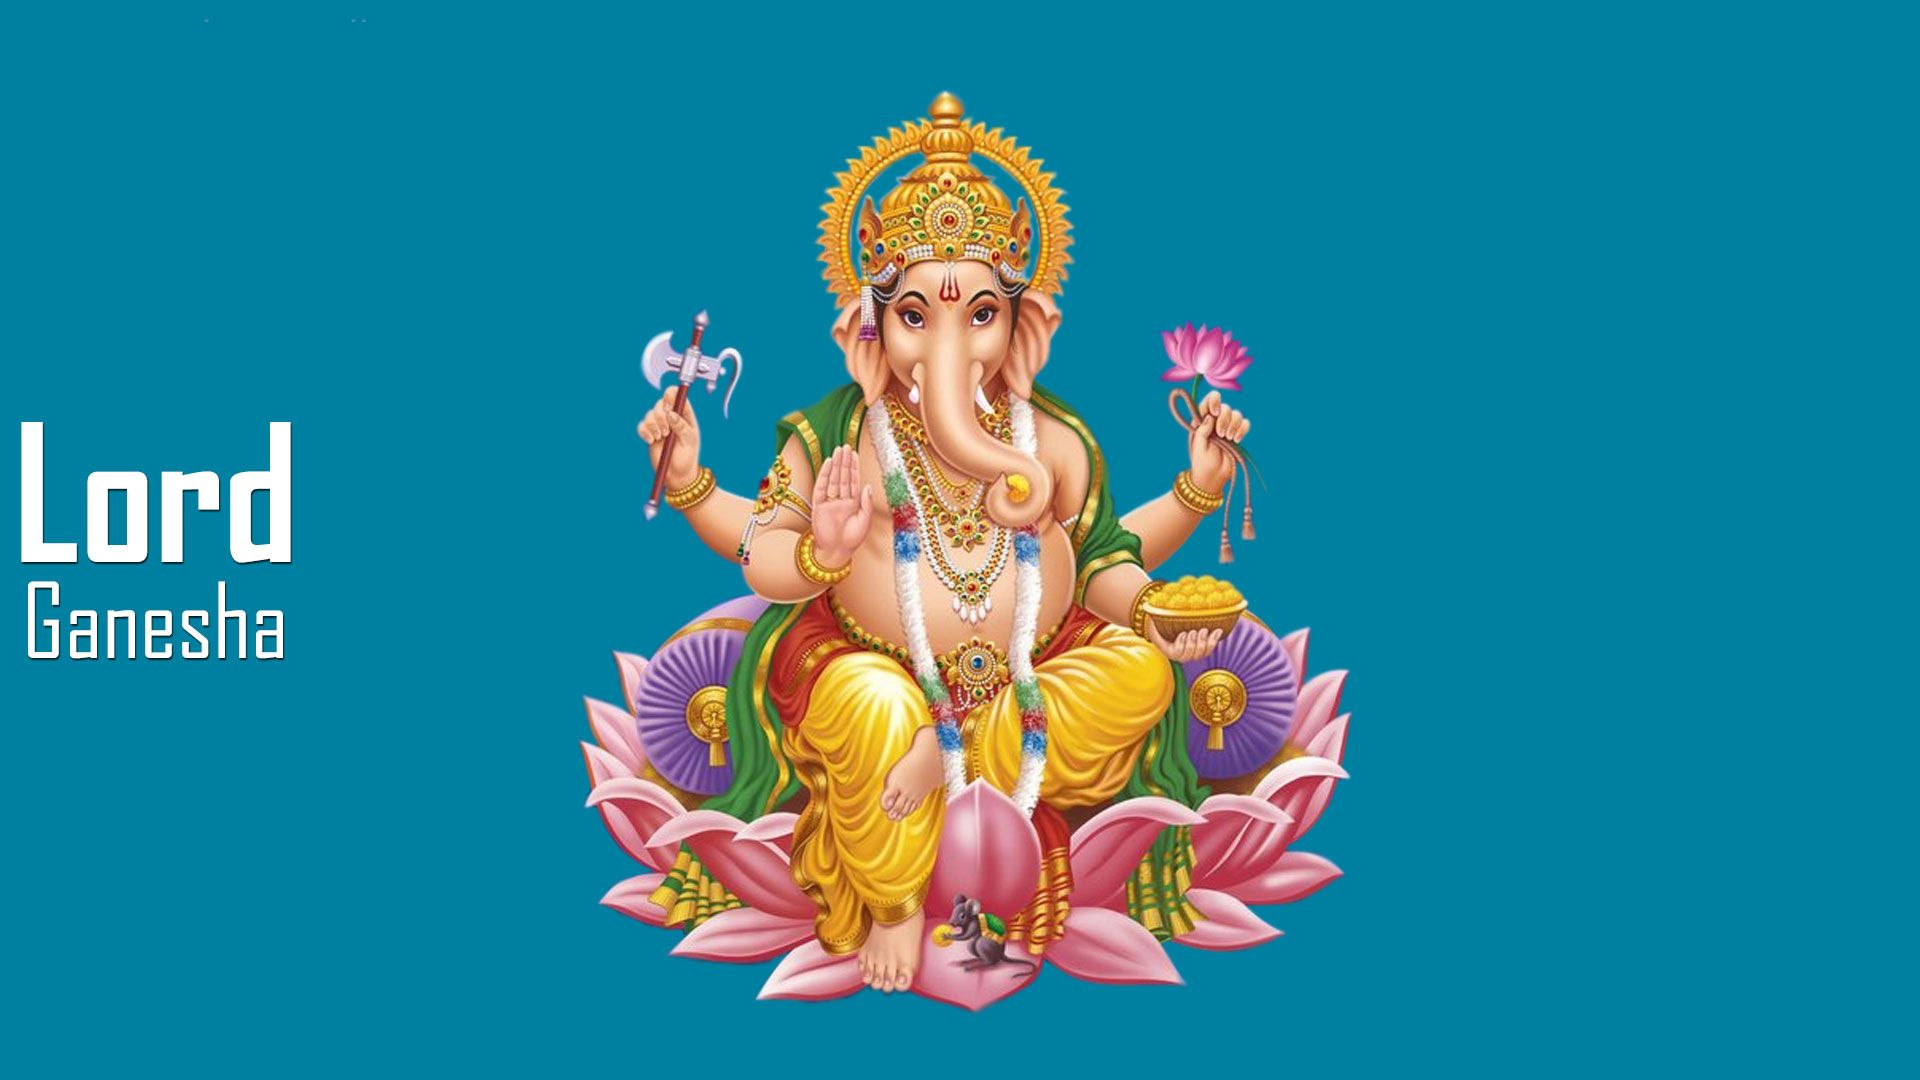 Ganpati Bappa God poster for worship room living room size 12x18 inch Fine  Art Print - Religious posters in India - Buy art, film, design, movie,  music, nature and educational paintings/wallpapers at